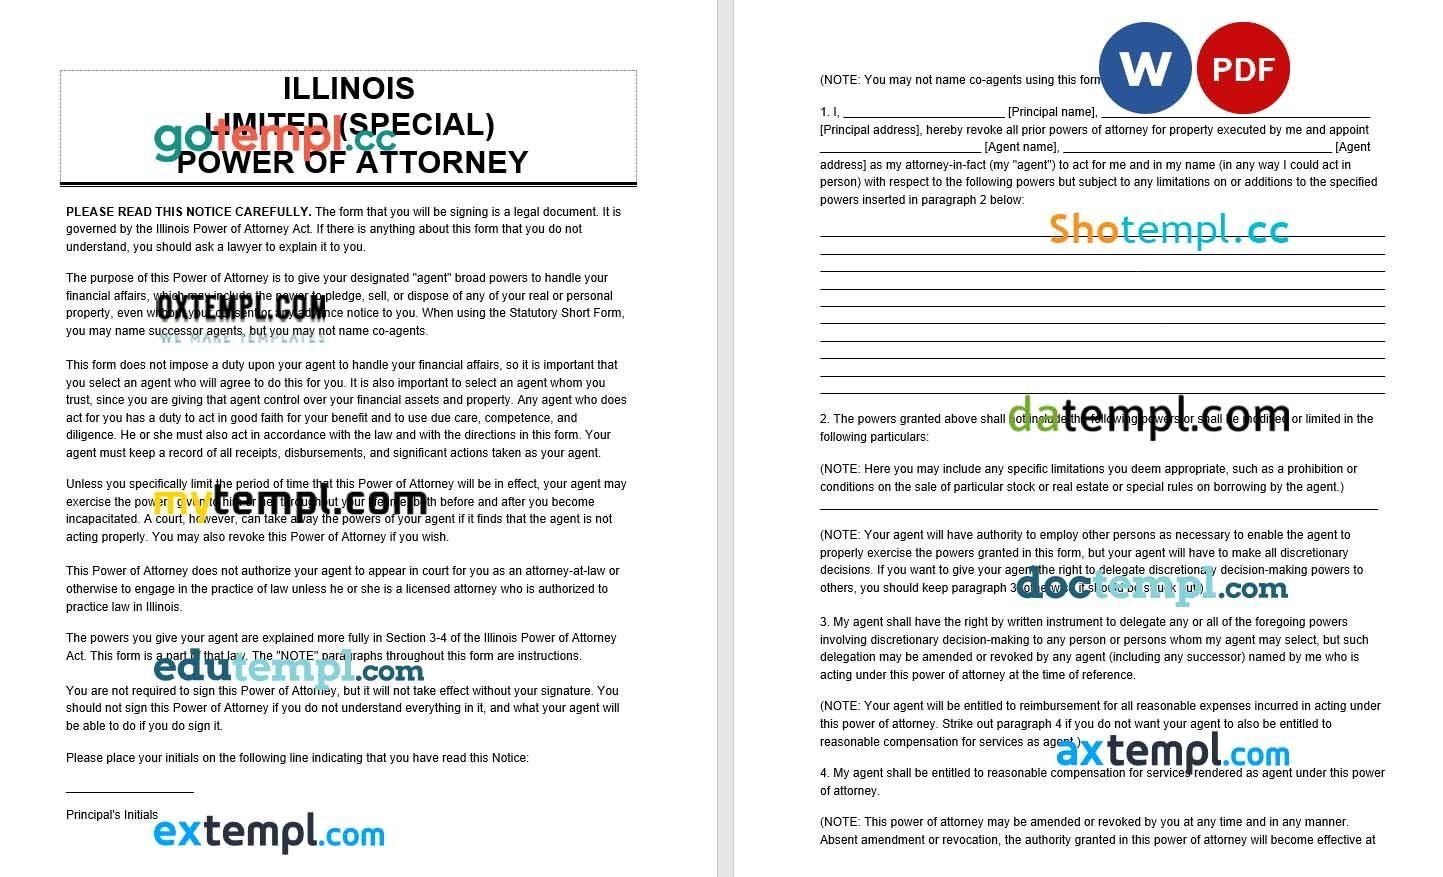 Illinois Limited Power of Attorney example, fully editable